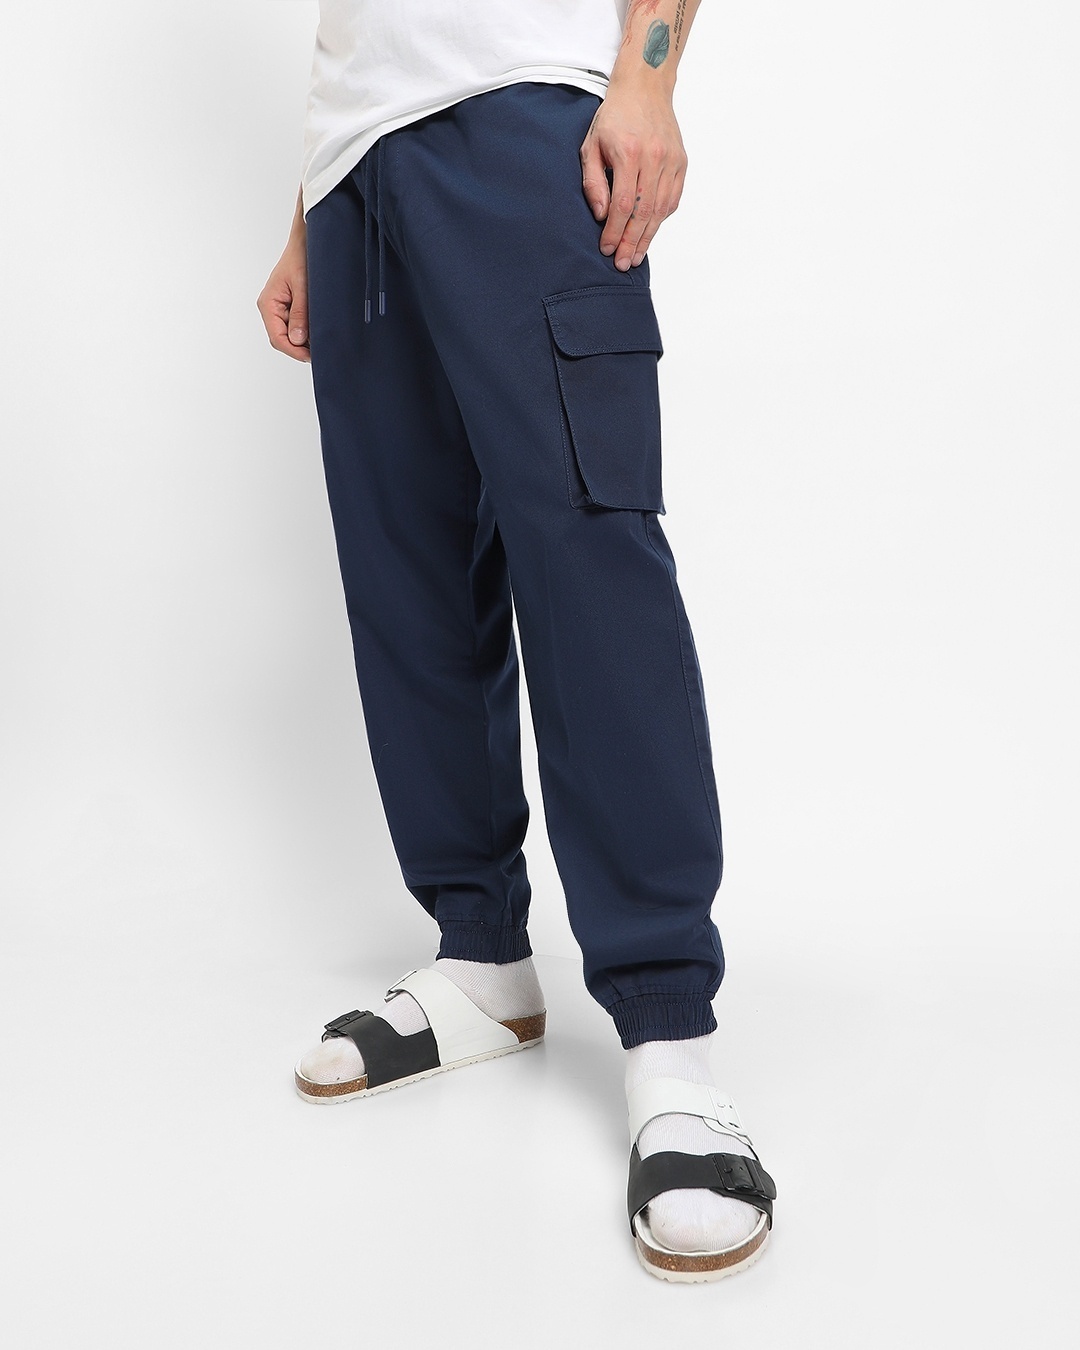 Buy Navy Twill Cargo Trousers  36L  Trousers  Argos